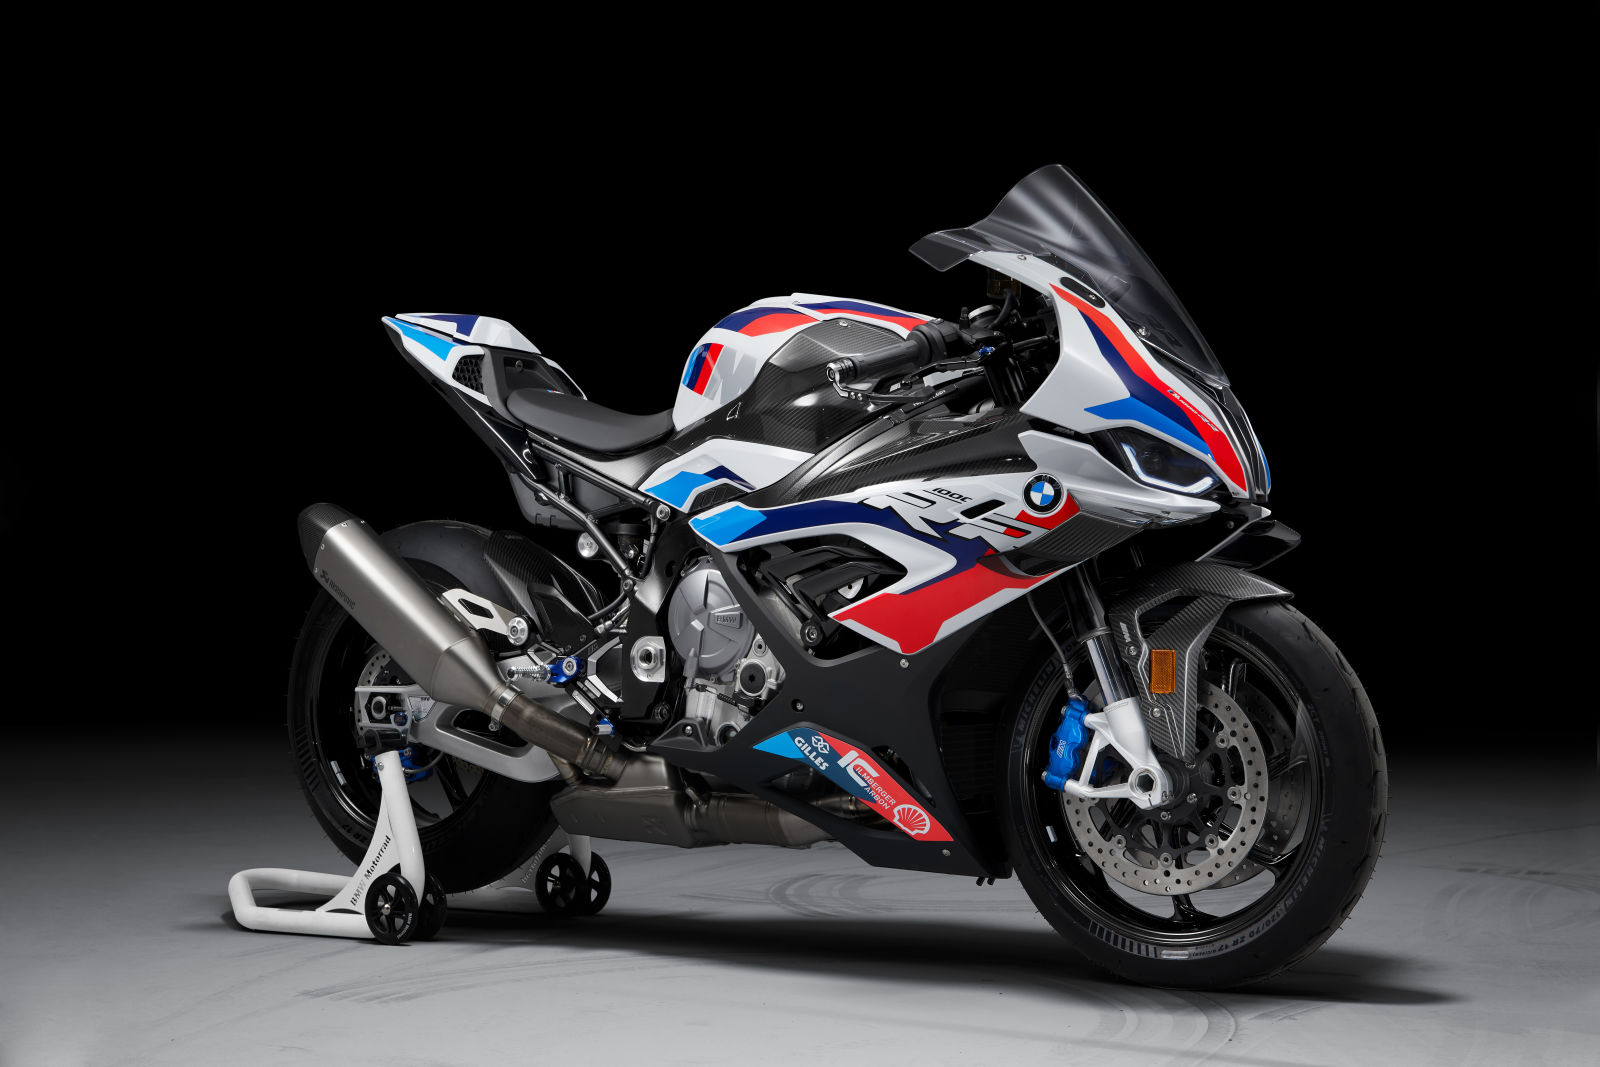 Illustration for article titled Wing all the things: BMW M1000RR